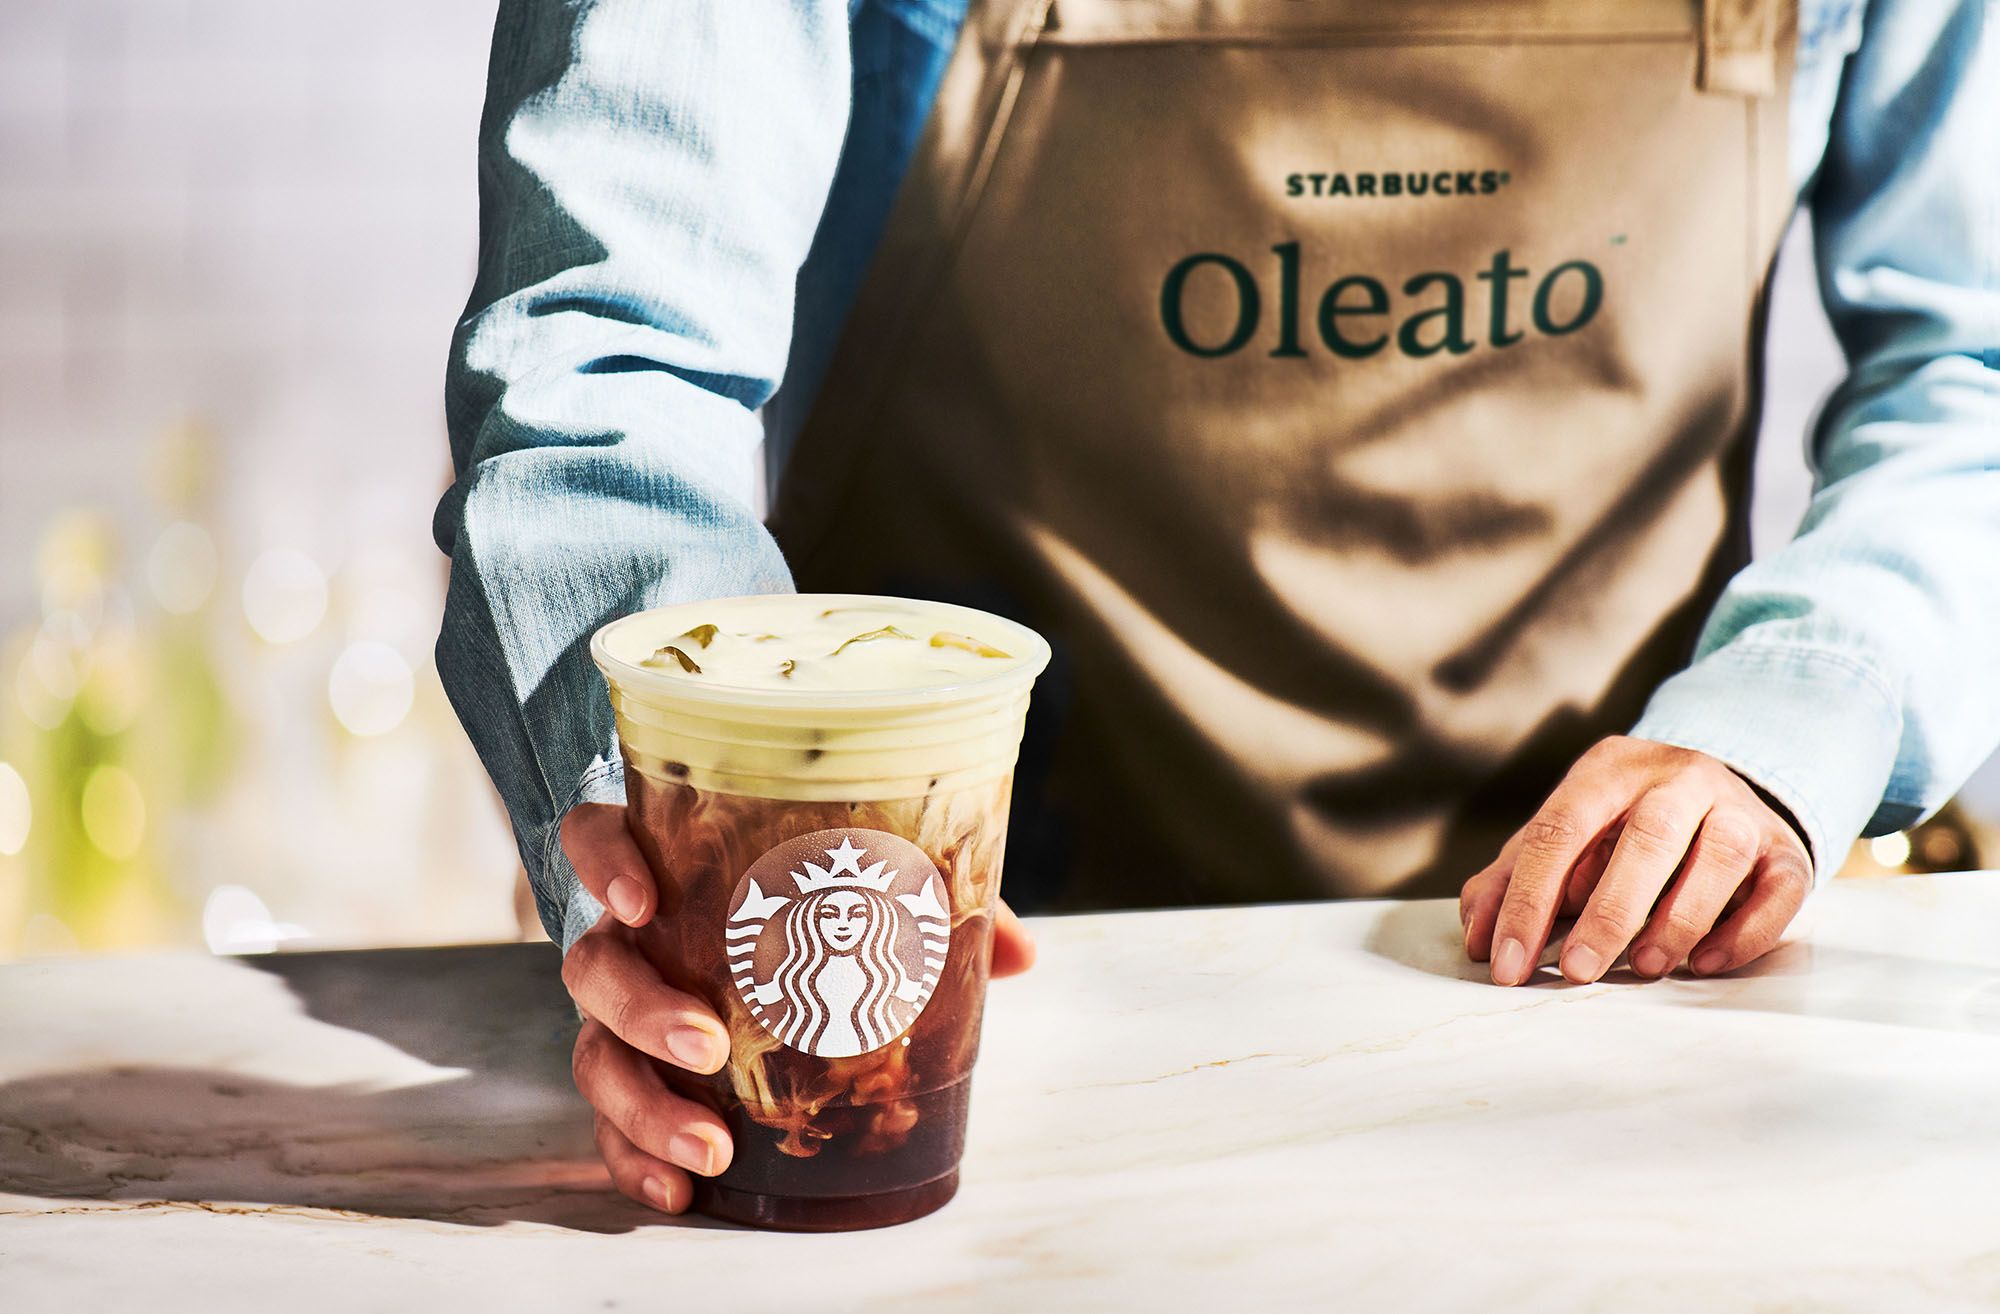 Starbucks Is Making A Splash In Italy With Its Launch Of Olive Oil Coffee Drinks